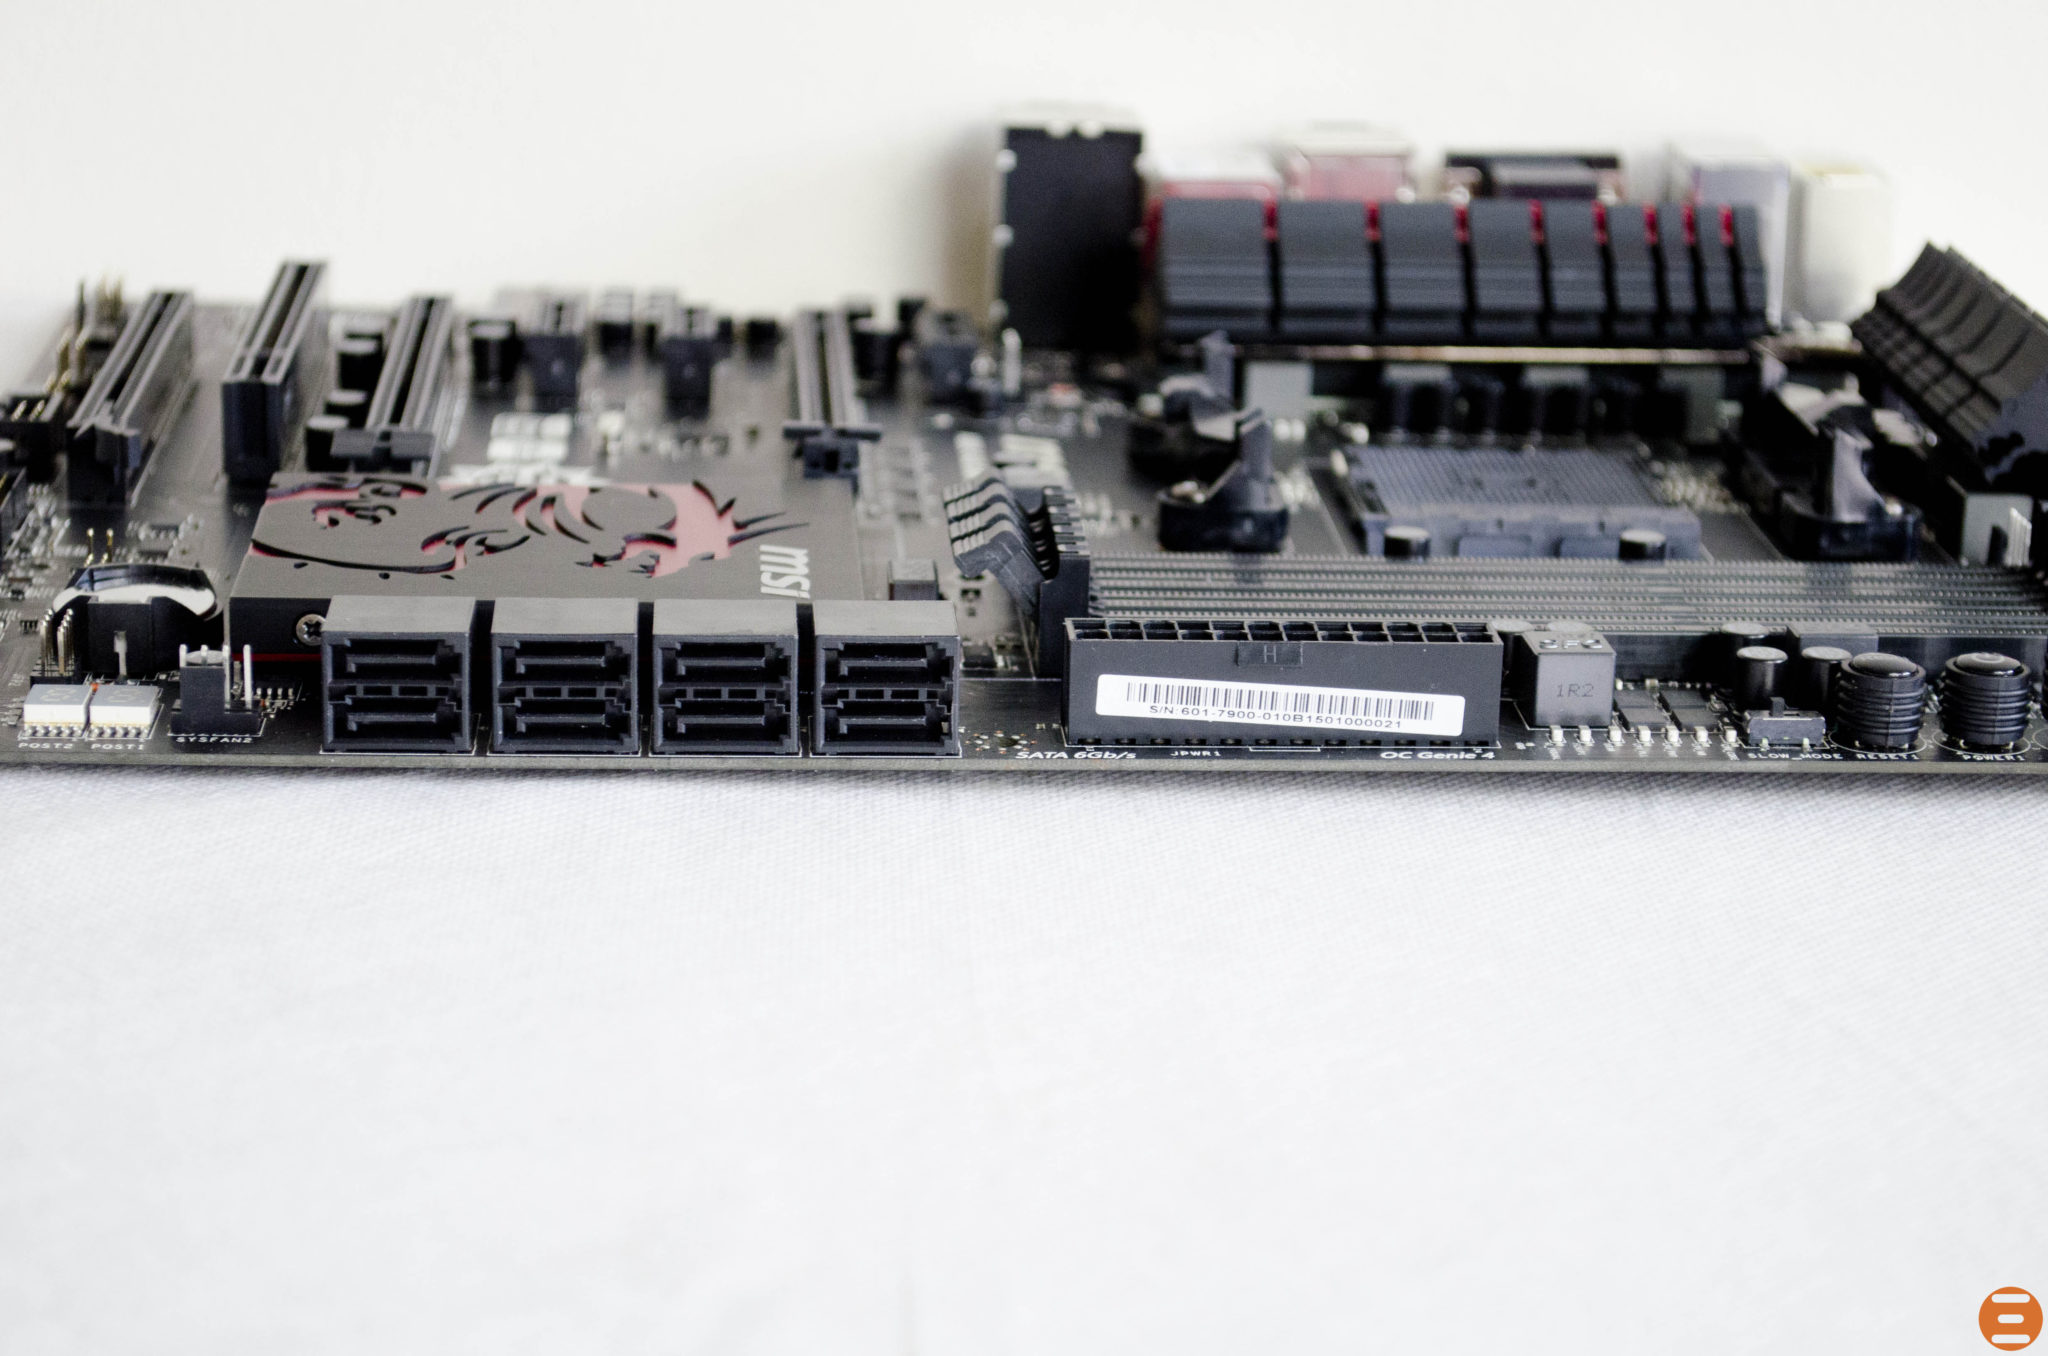 MSI A88X-G45 Gaming Motherboard_9